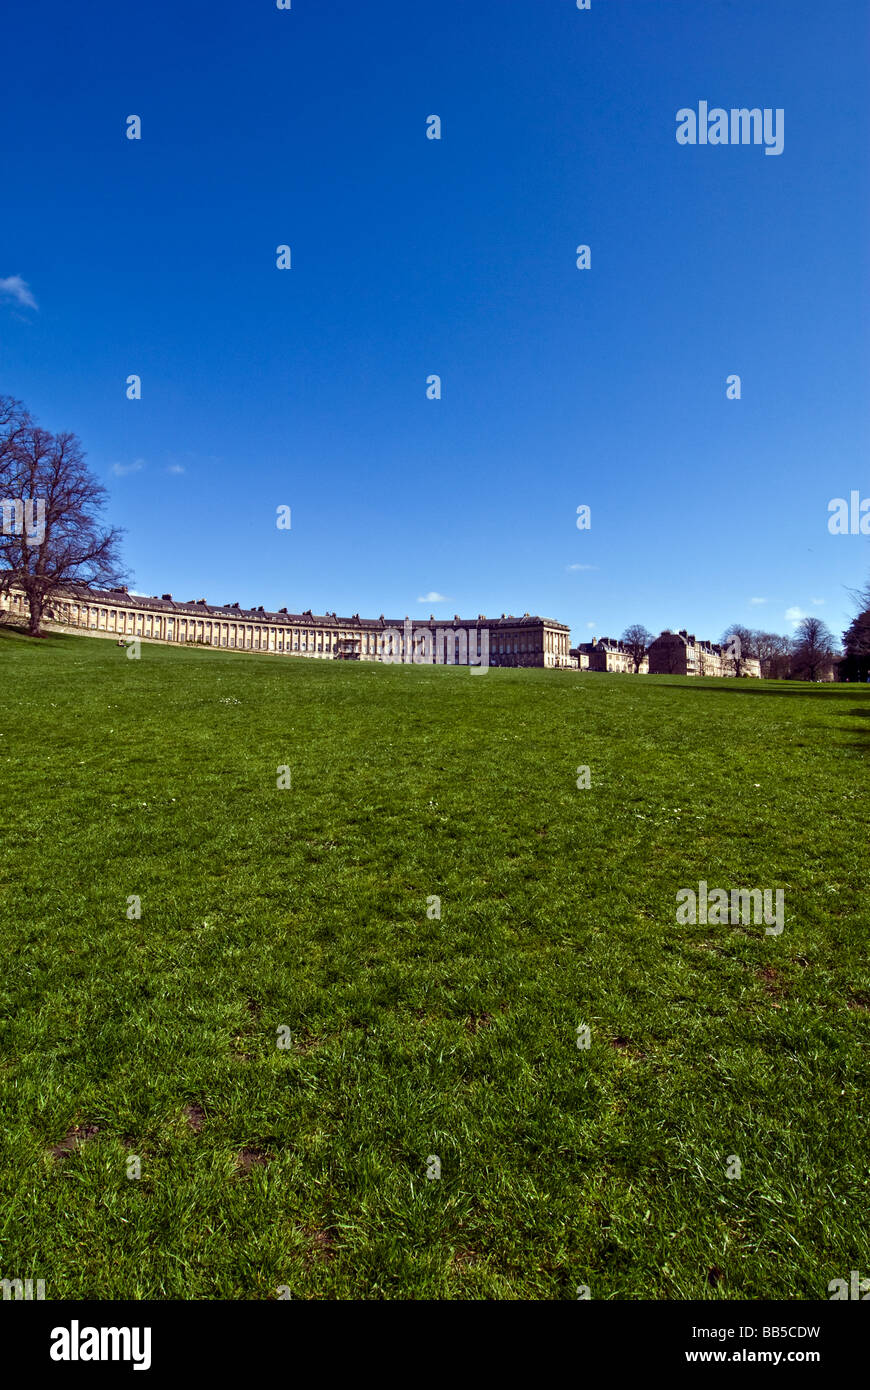 View of Royal Crescent from Royal Victoria Park, Bath, Somerset, England, UK Stock Photo